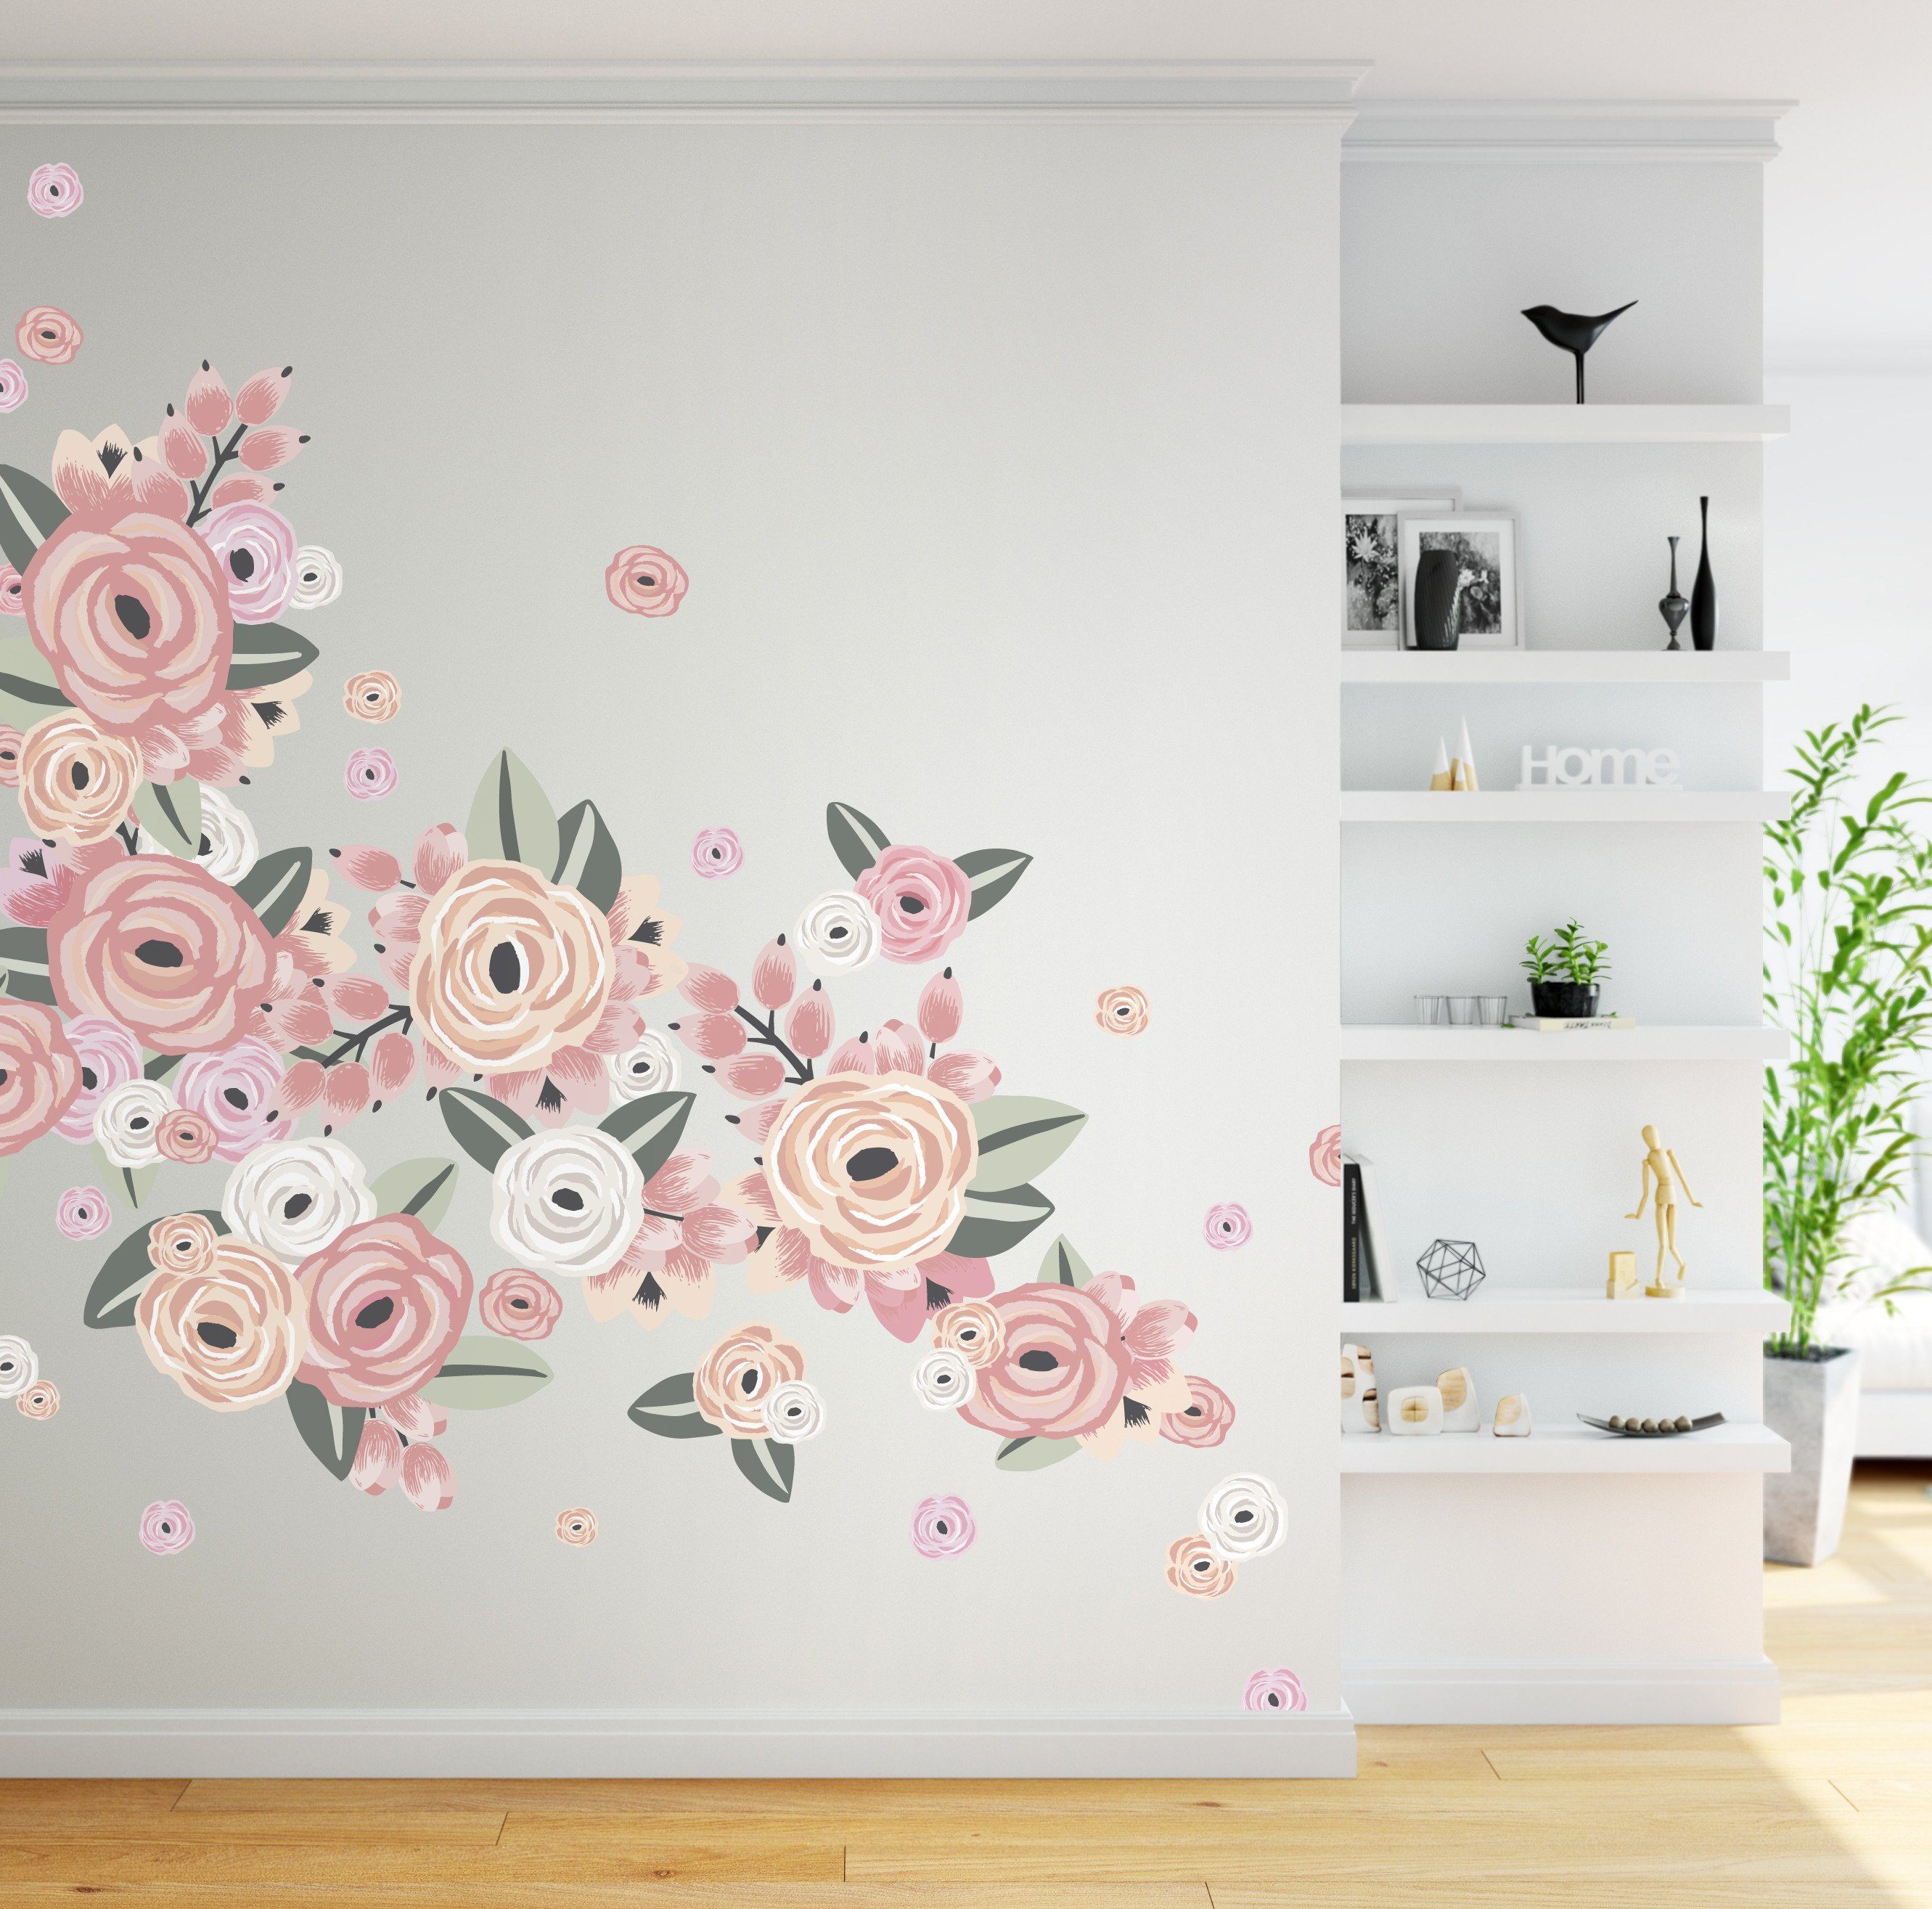 Graphic Flower Cluster Wall Decals - Decal Set / Faded Pink